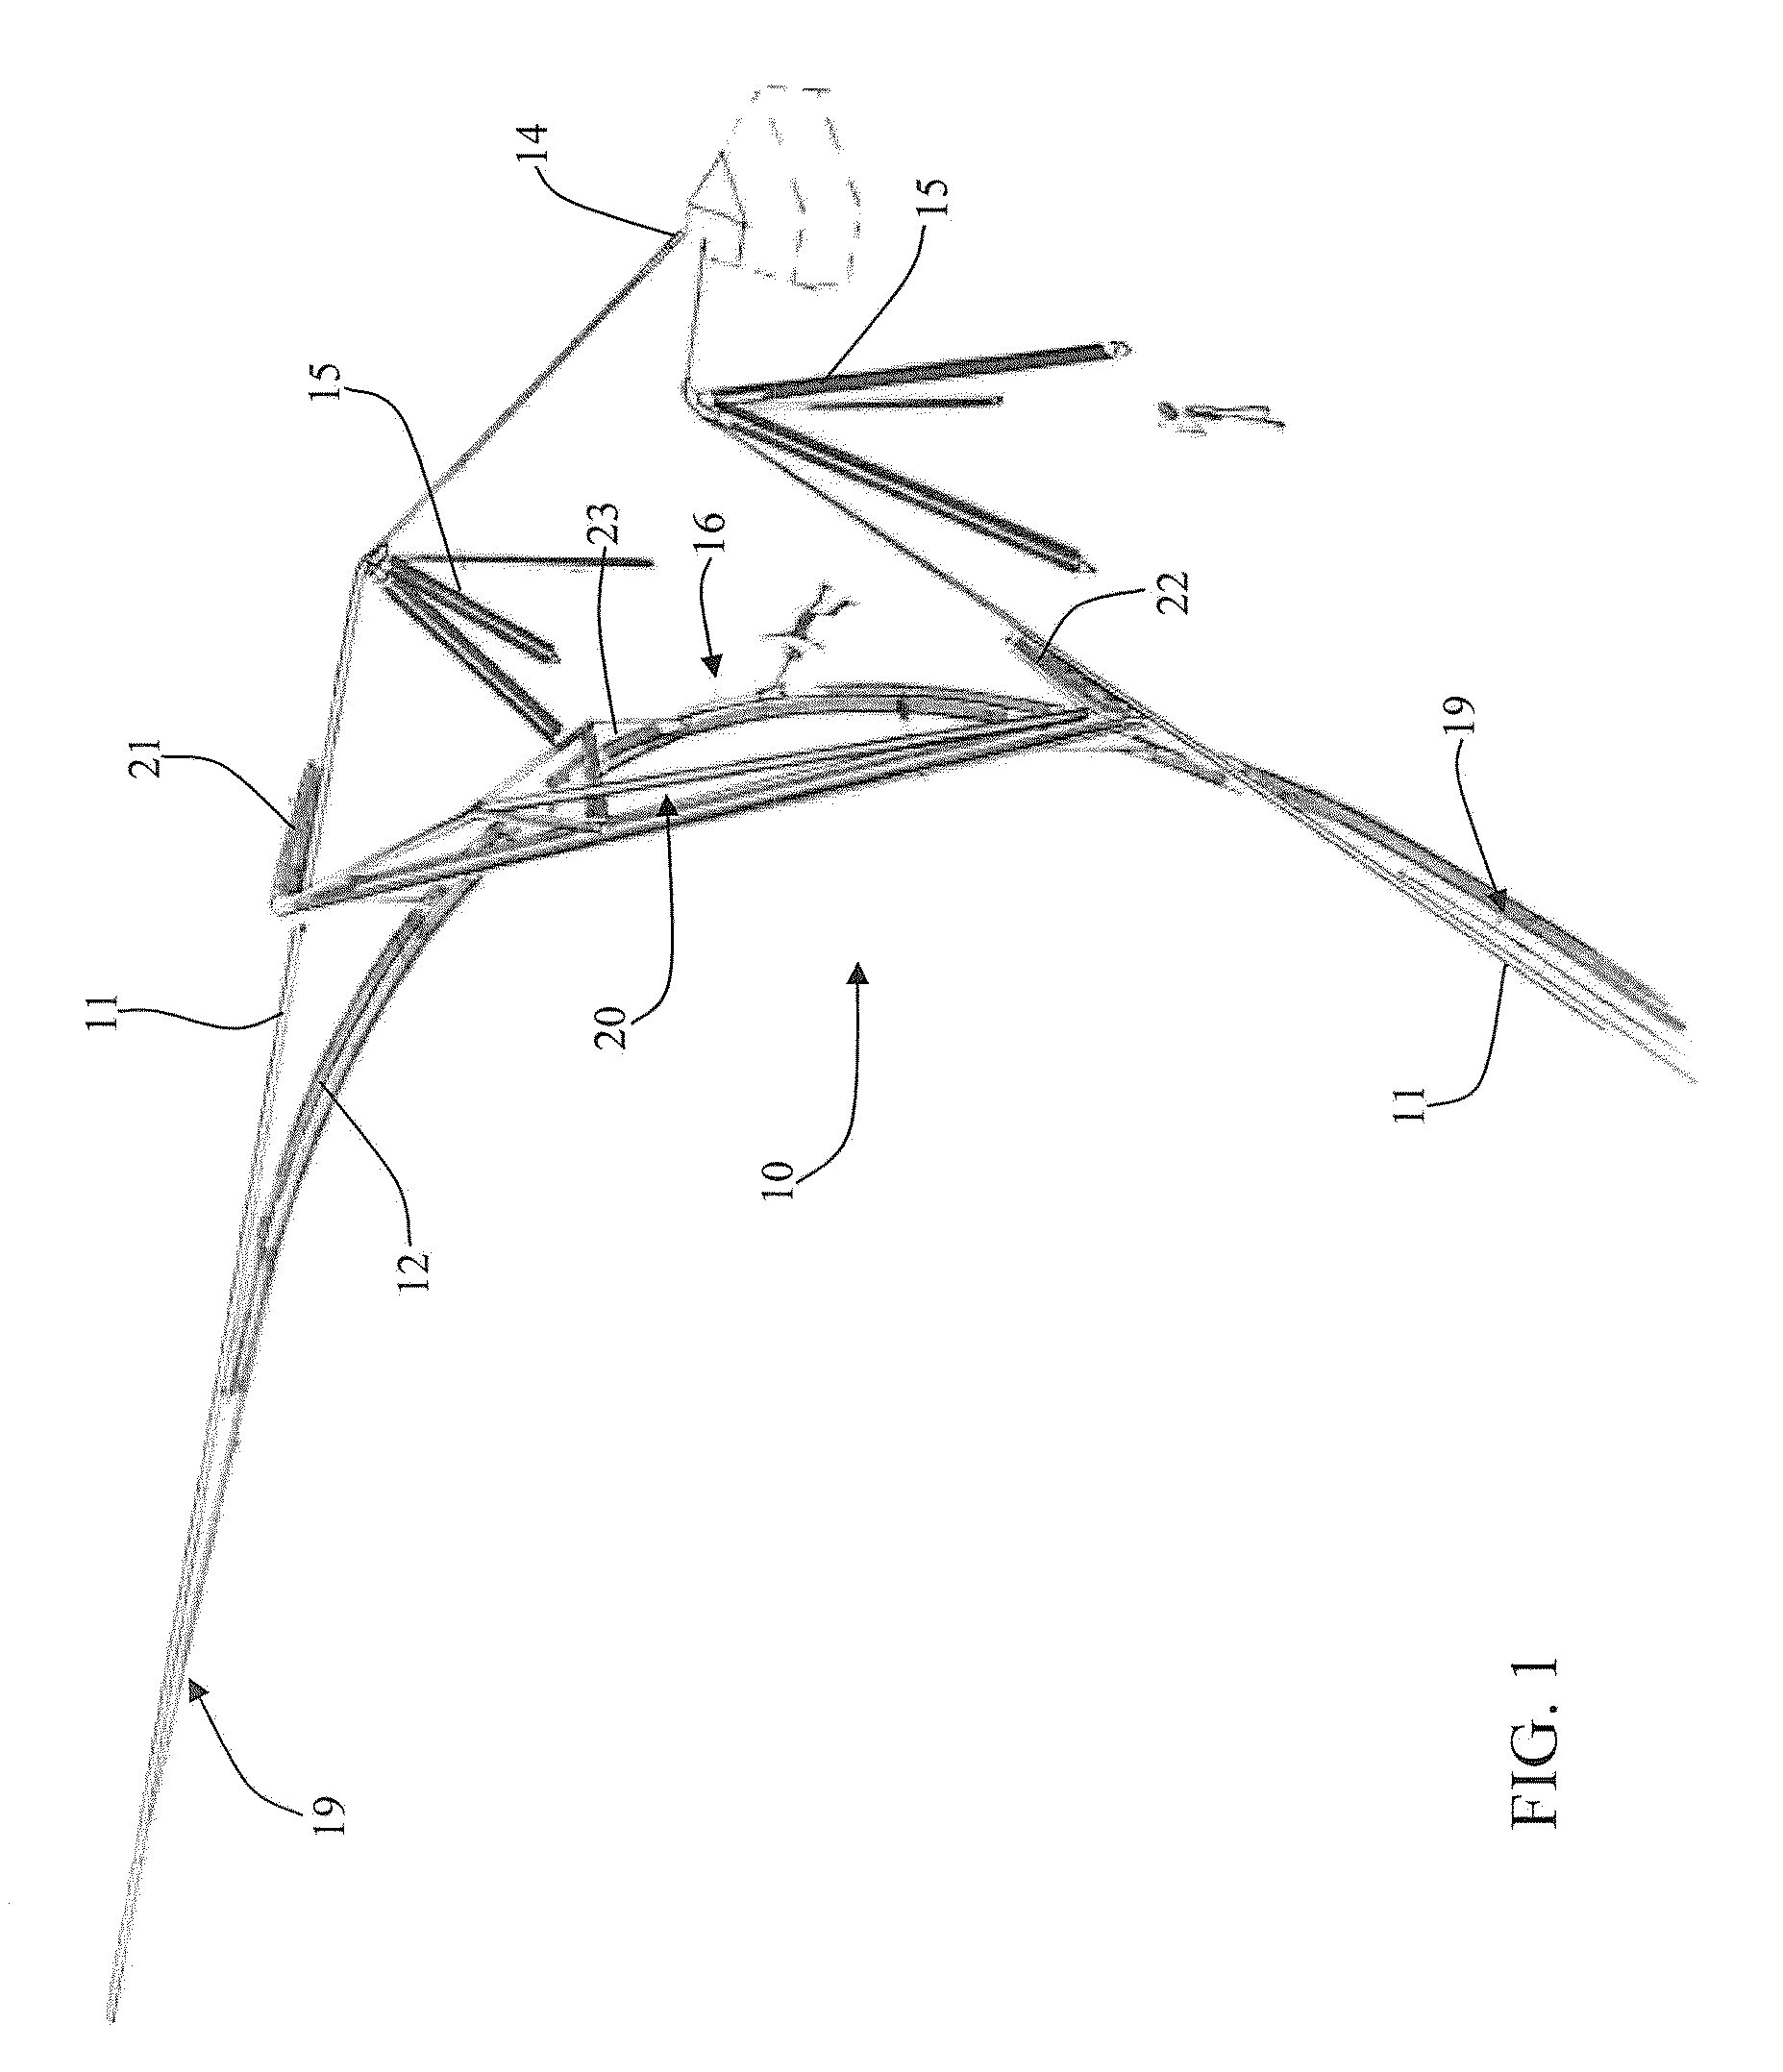 Device for suspending and moving an object or person